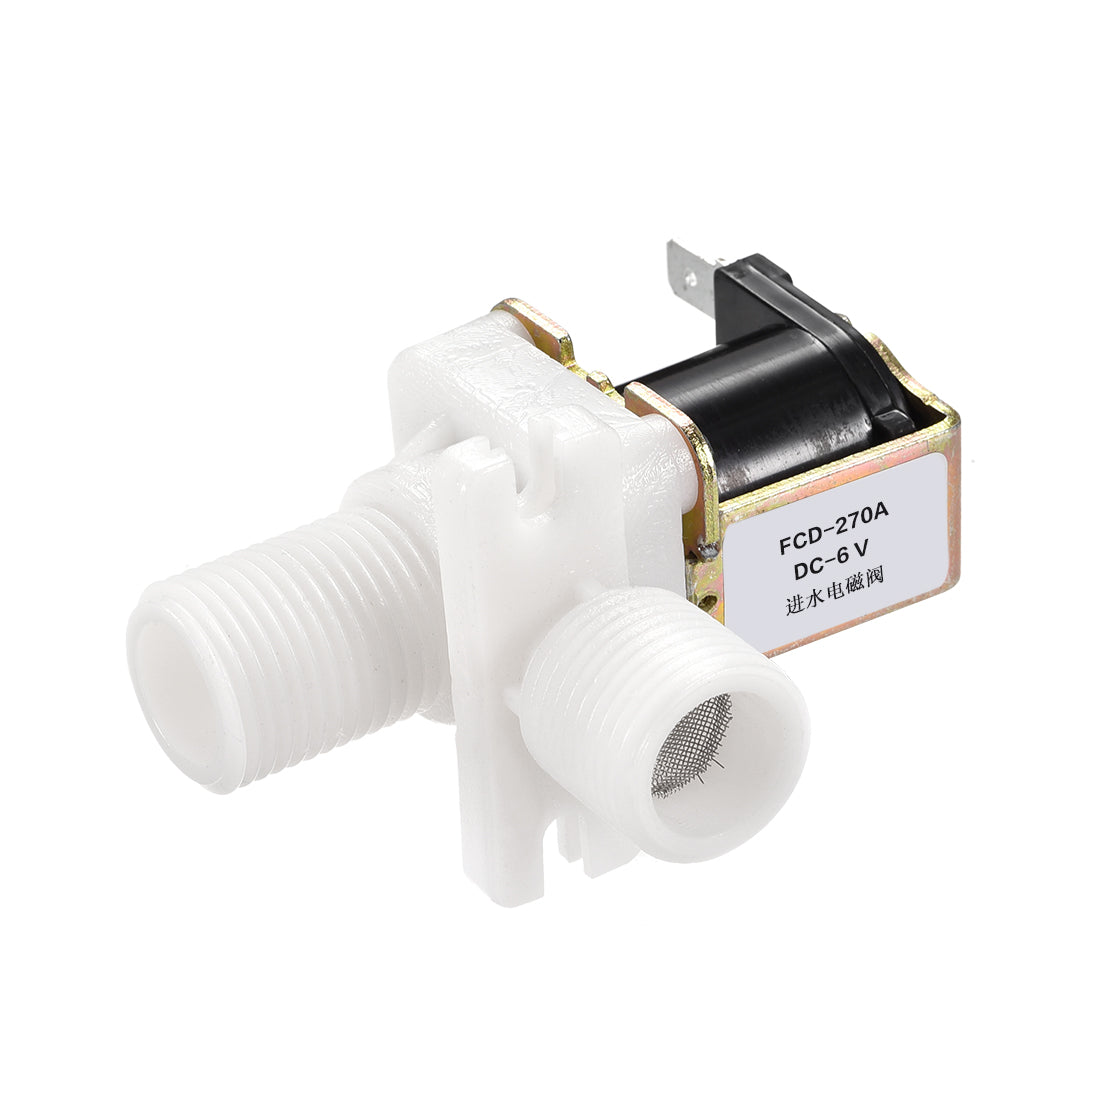 uxcell Uxcell DC6V G1/2 Male Thread Plastic Water Electric Solenoid Valve Normally Closed N/C Pressure Water Inlet Flow Switch